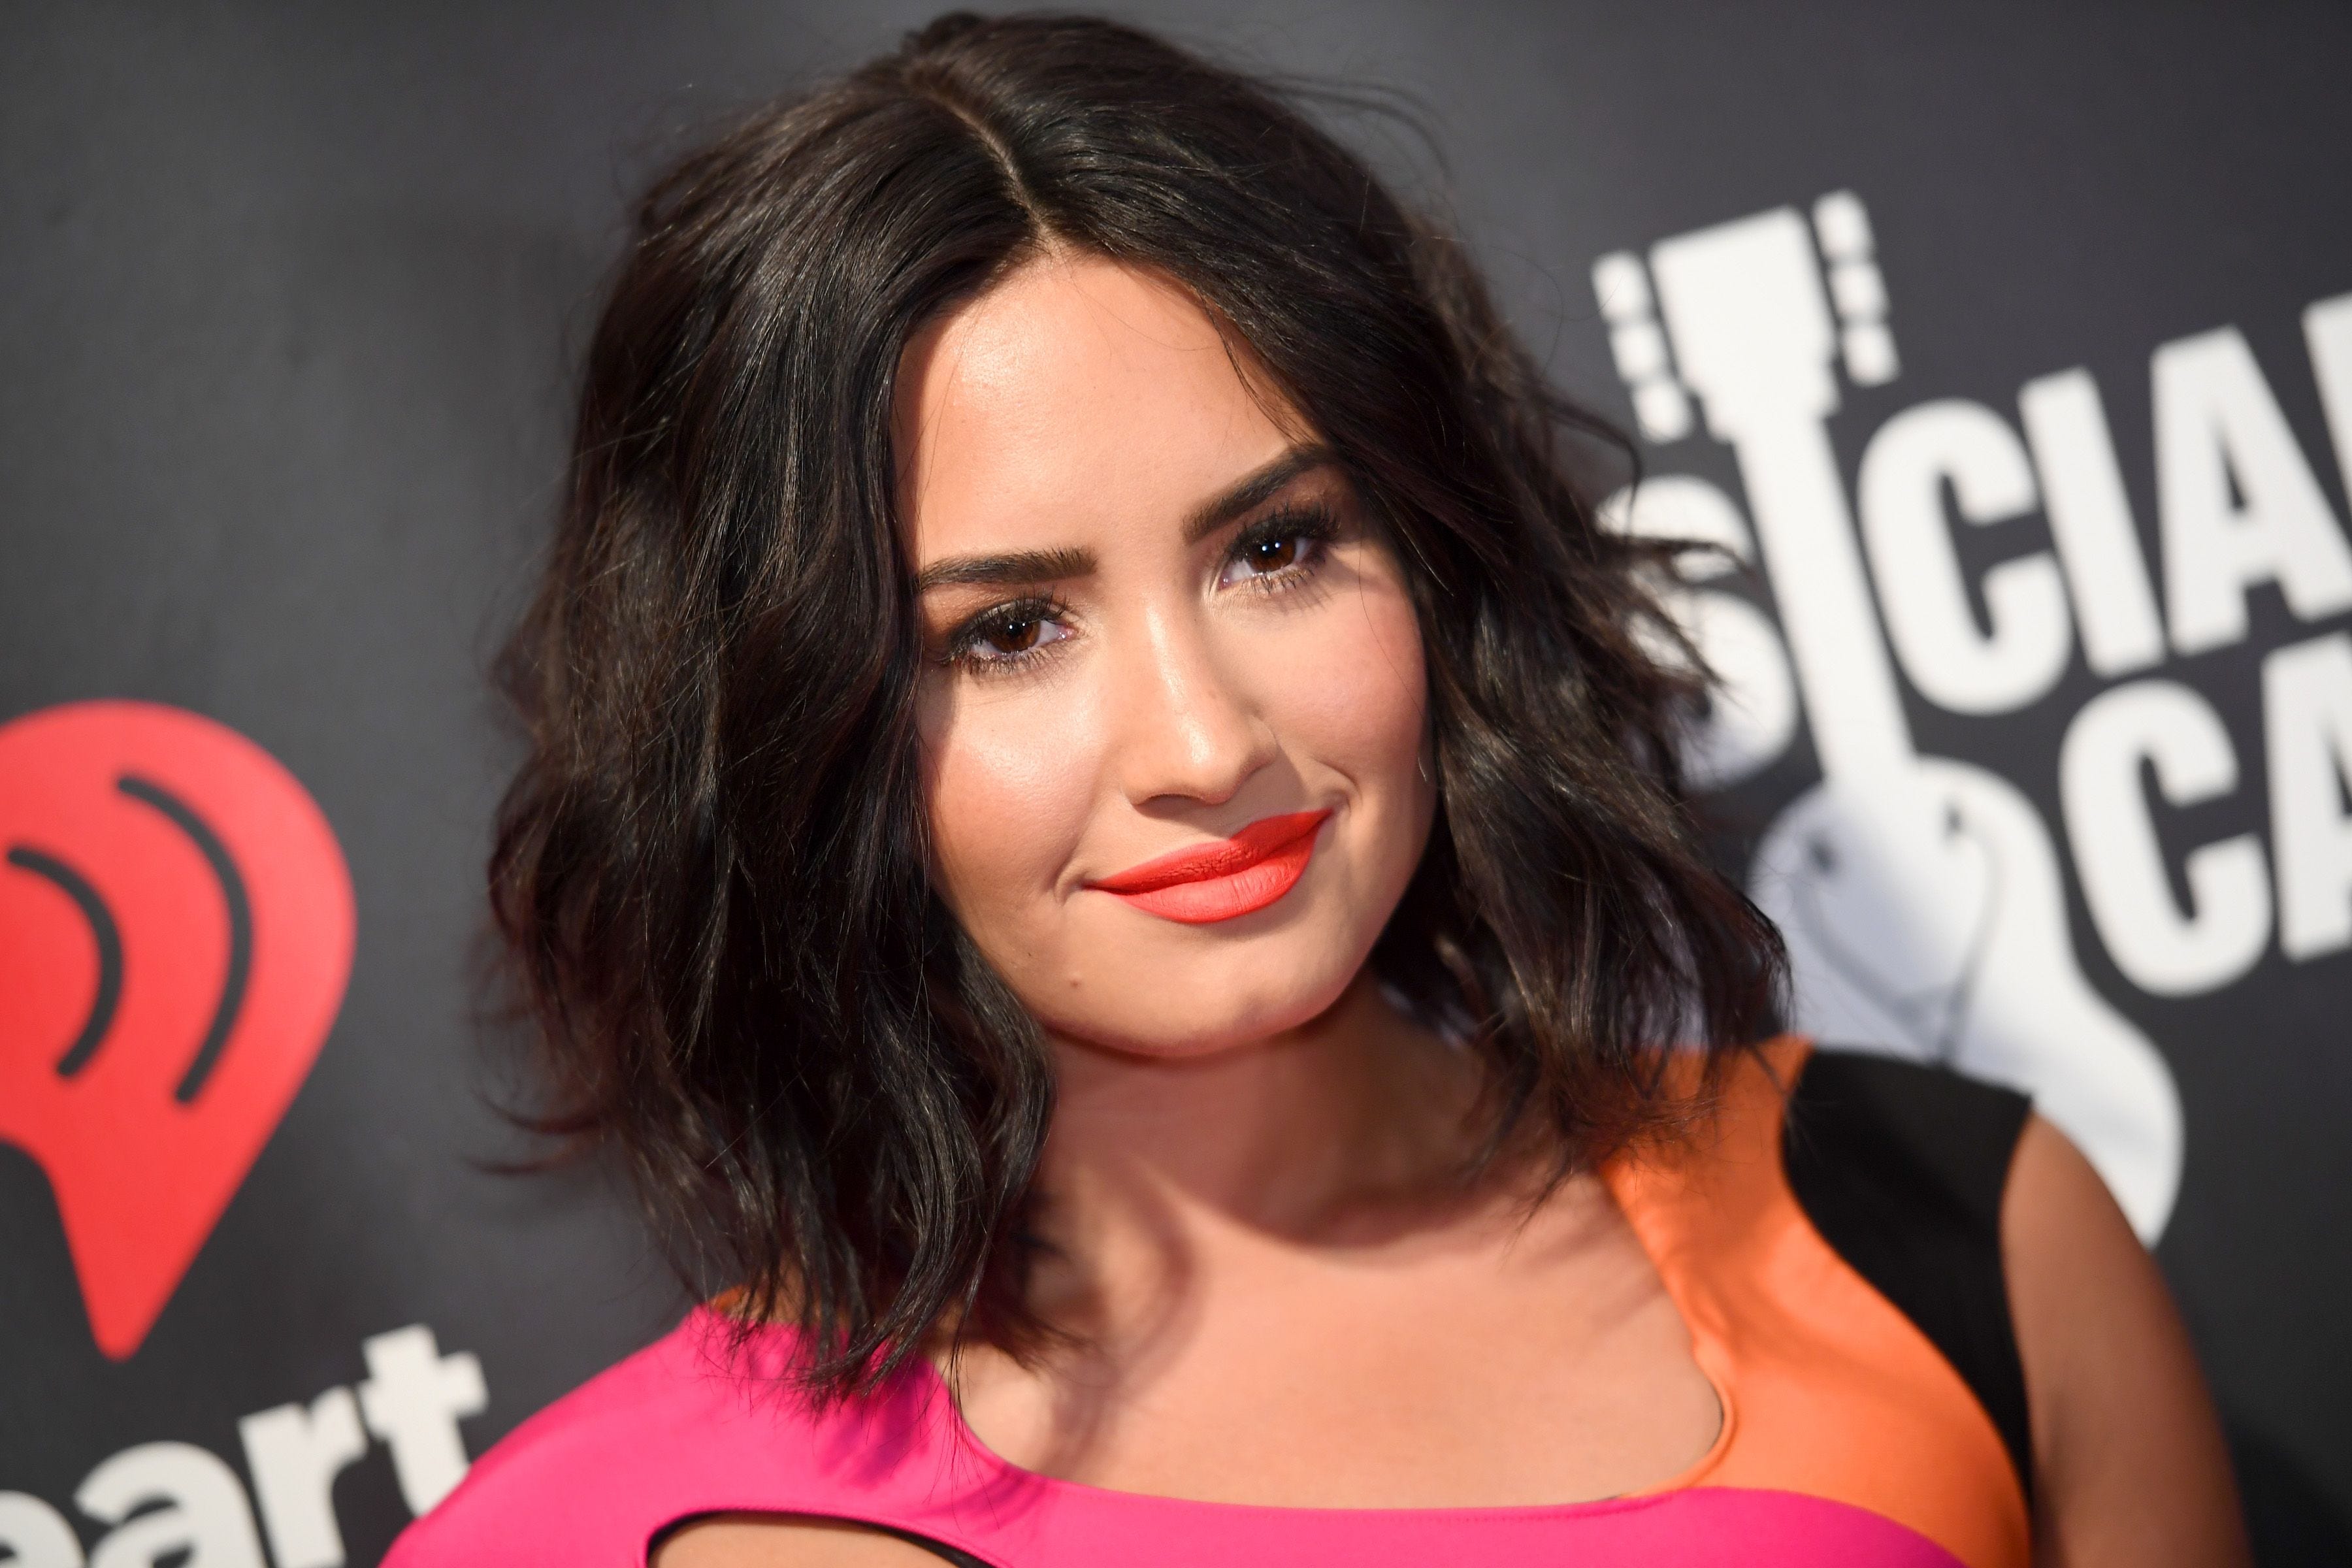 Demi Lovato laughs off revealing photo: 'It's not nude and it's just cleavage'